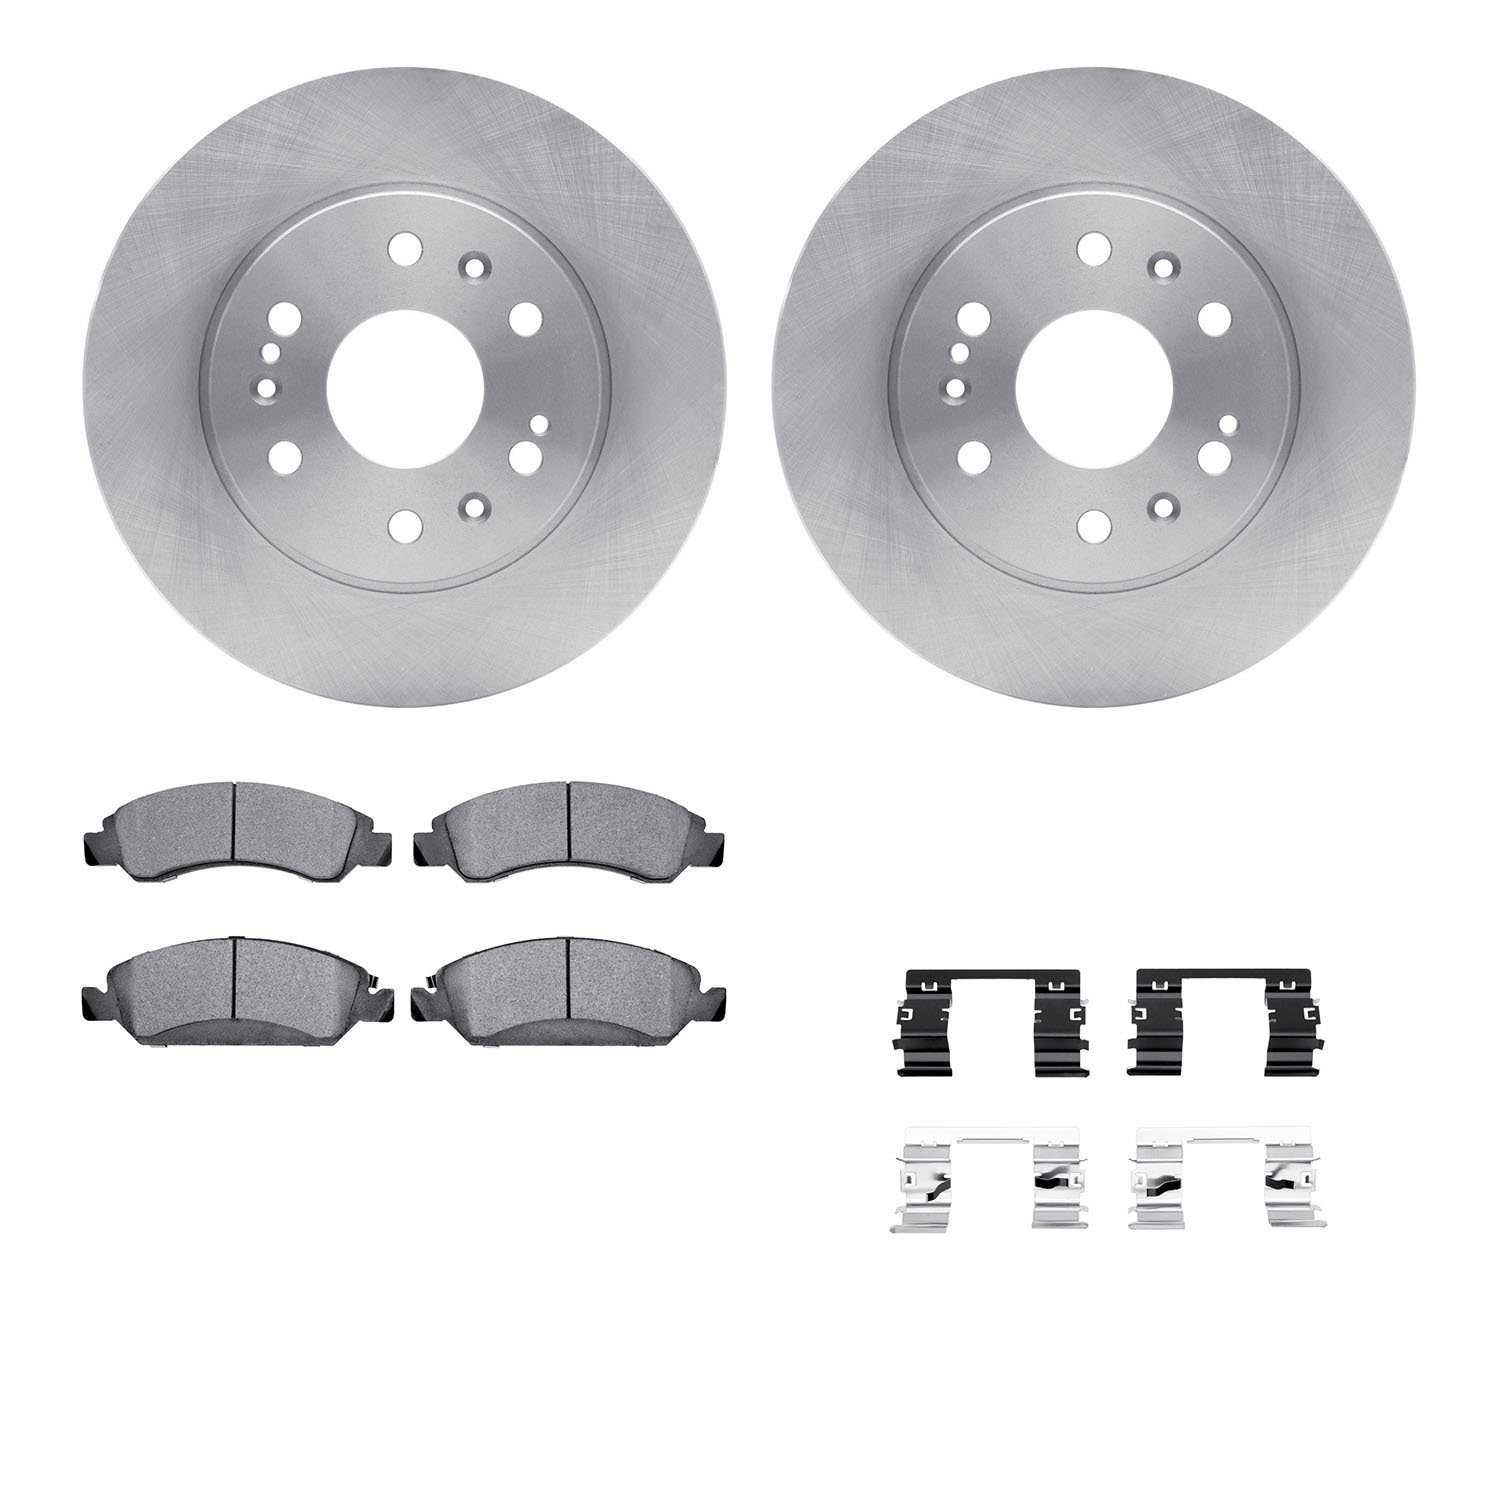 6412-48104 Brake Rotors with Ultimate-Duty Brake Pads Kit & Hardware, 2005-2020 GM, Position: Front